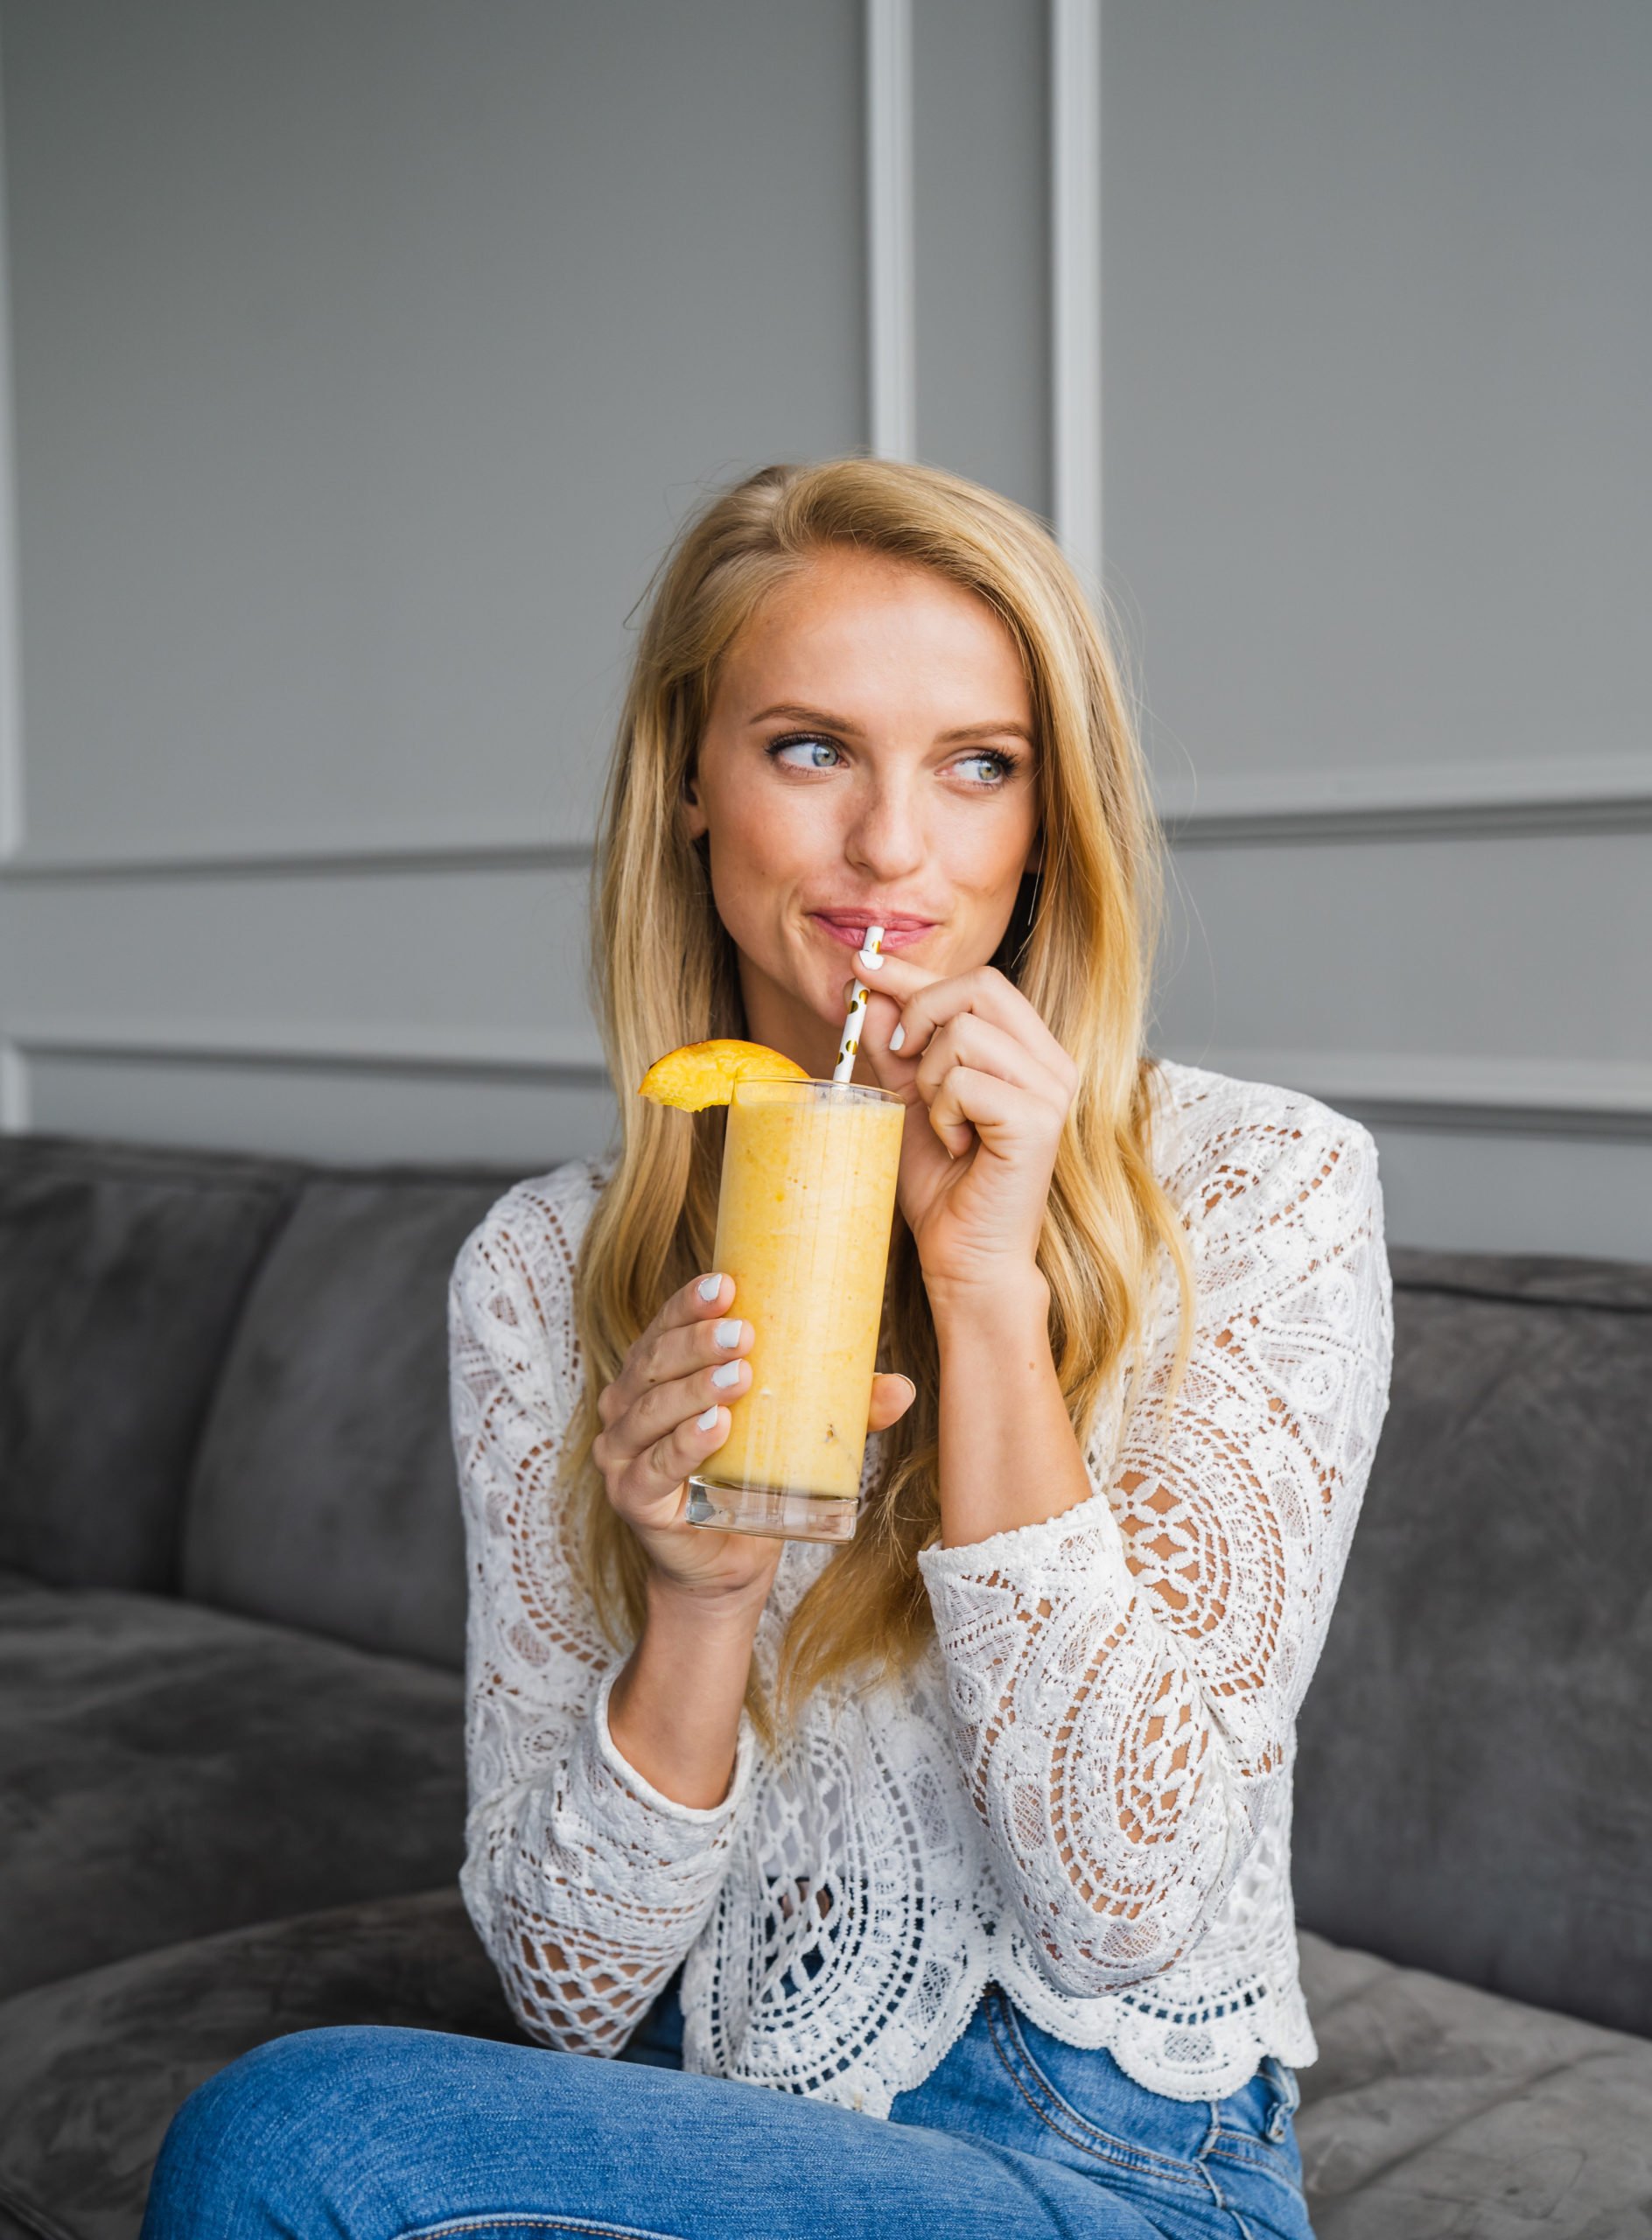 Woman sitting couch drinking a peach mango smoothie